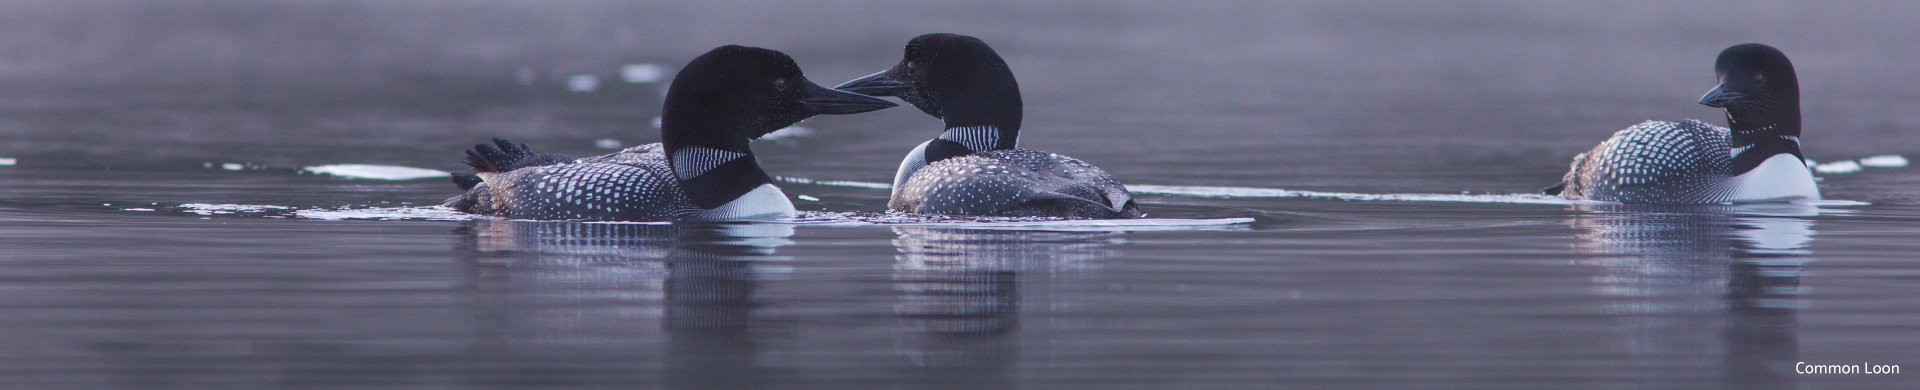 common-loon-dh